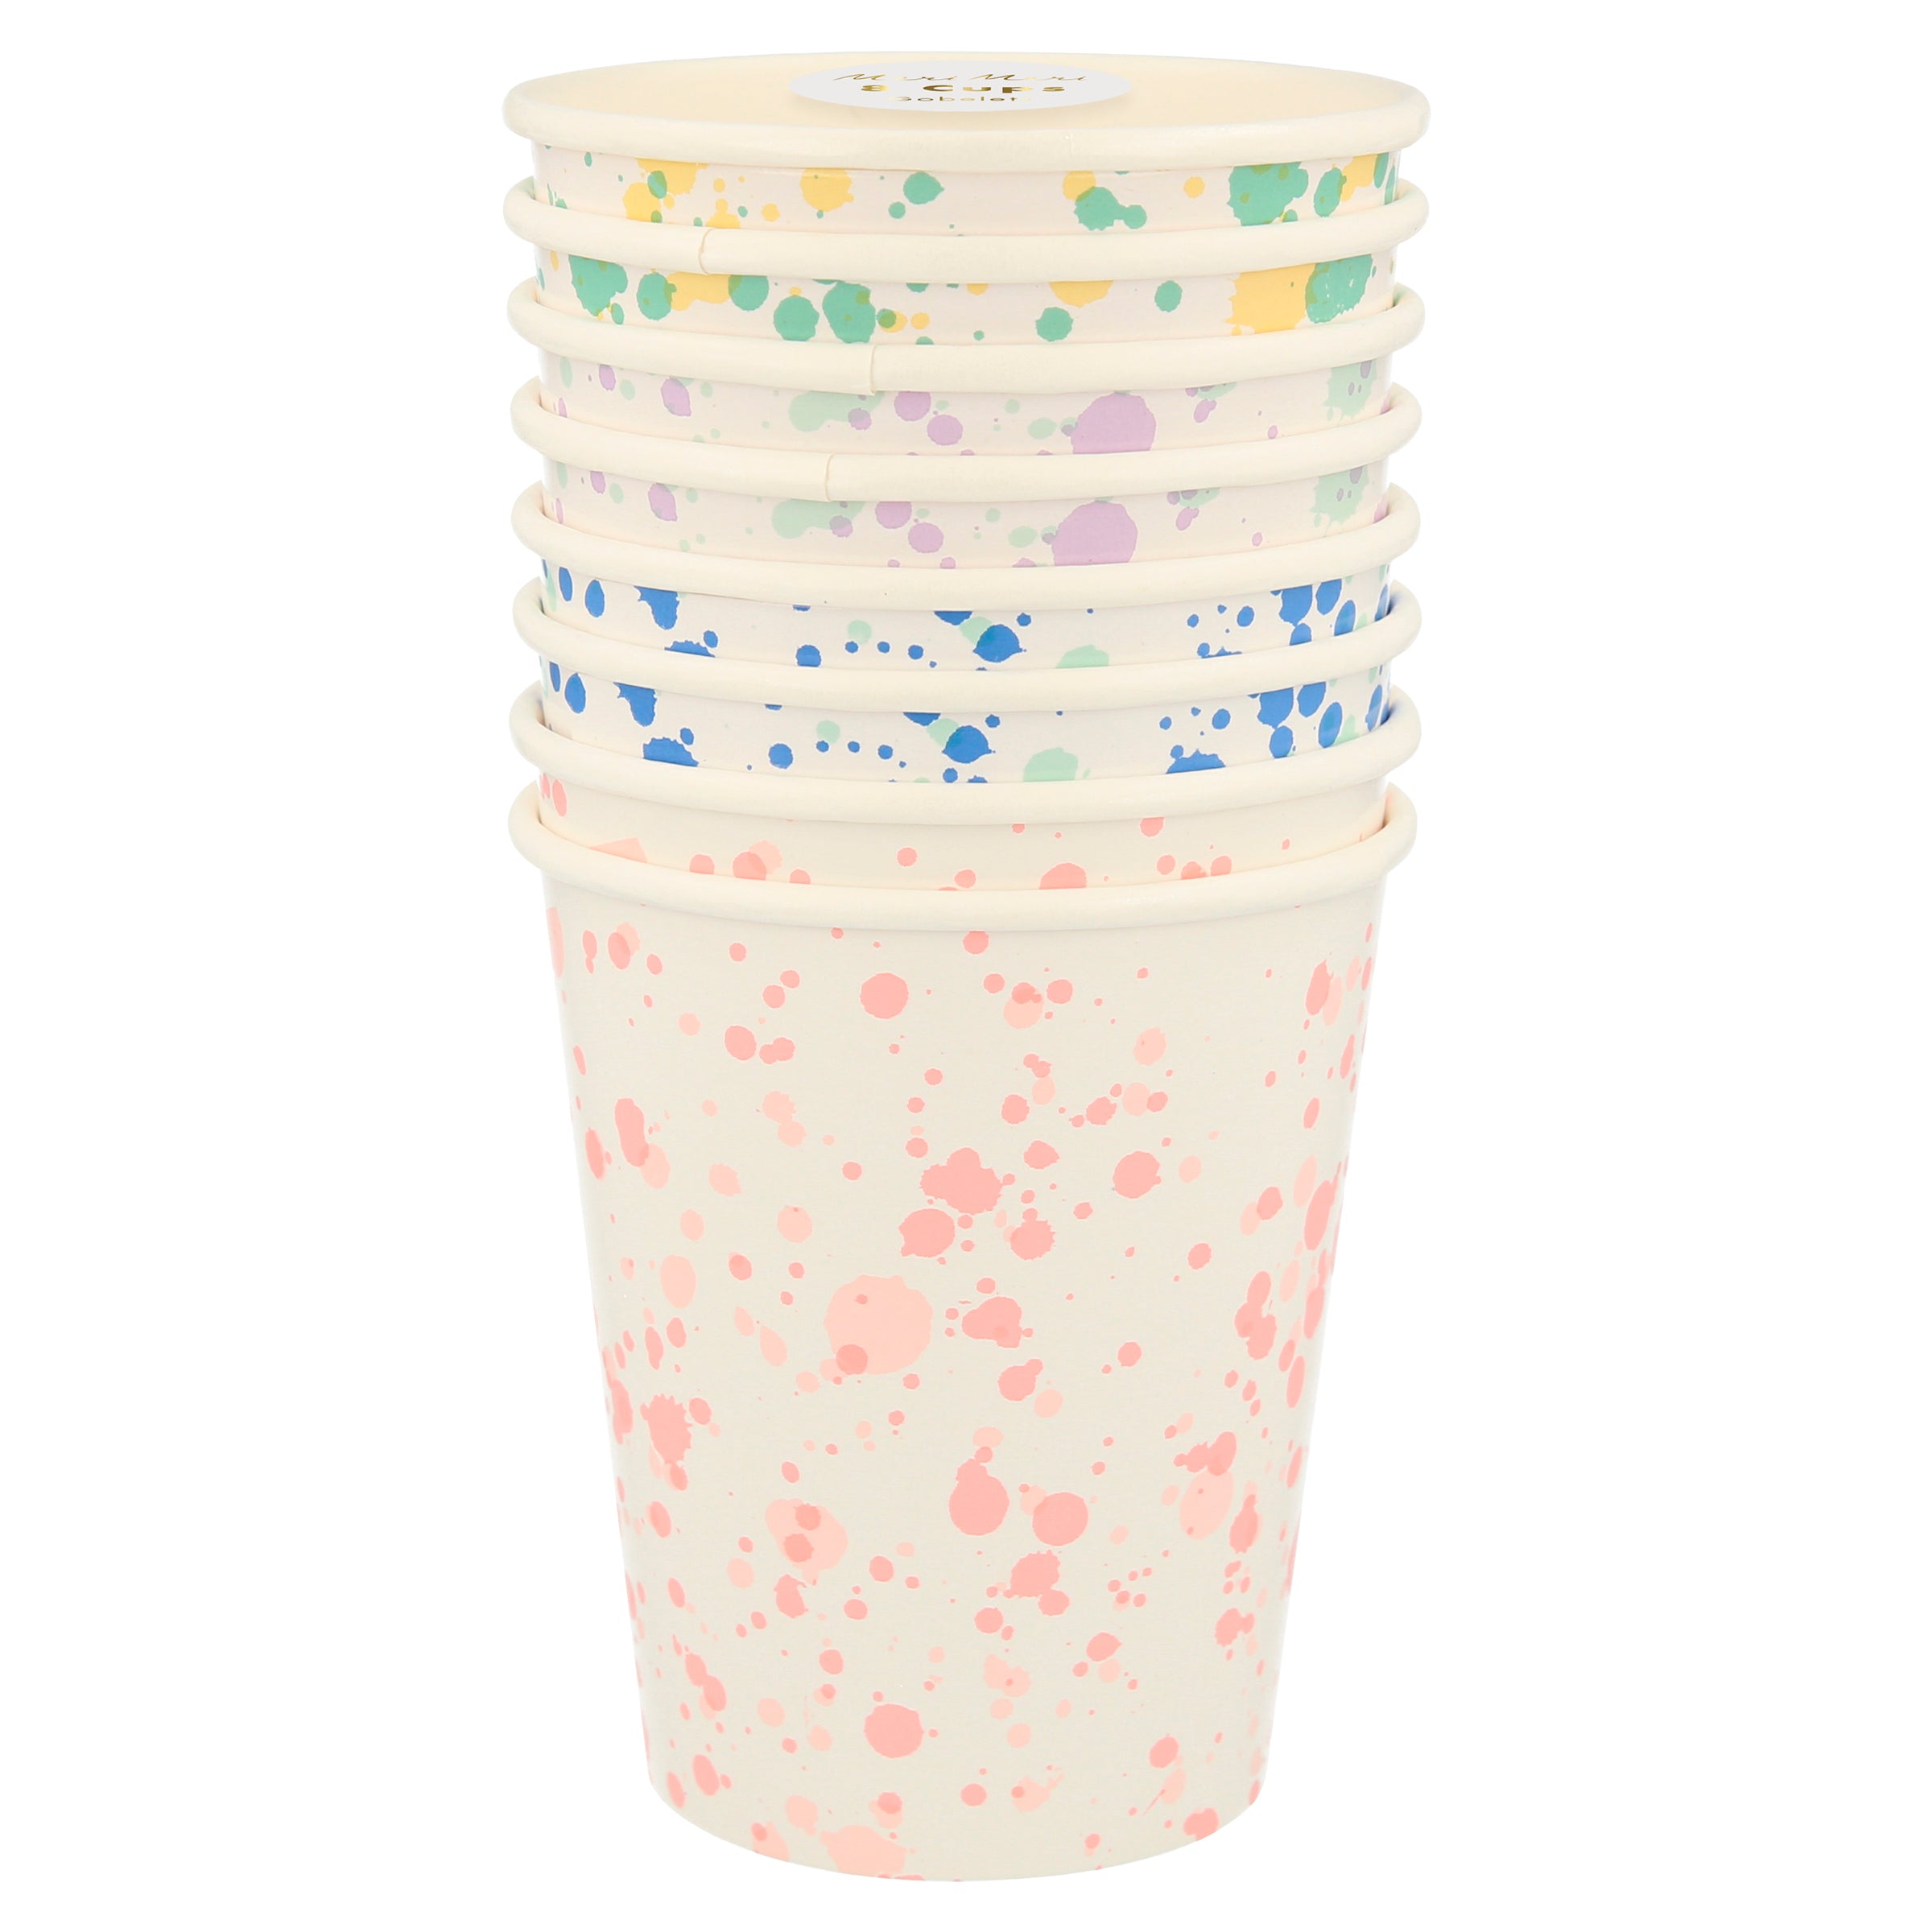 Our paper cups feature a speckling of colours, making them ideal for any kids birthday party themes or baby showers.